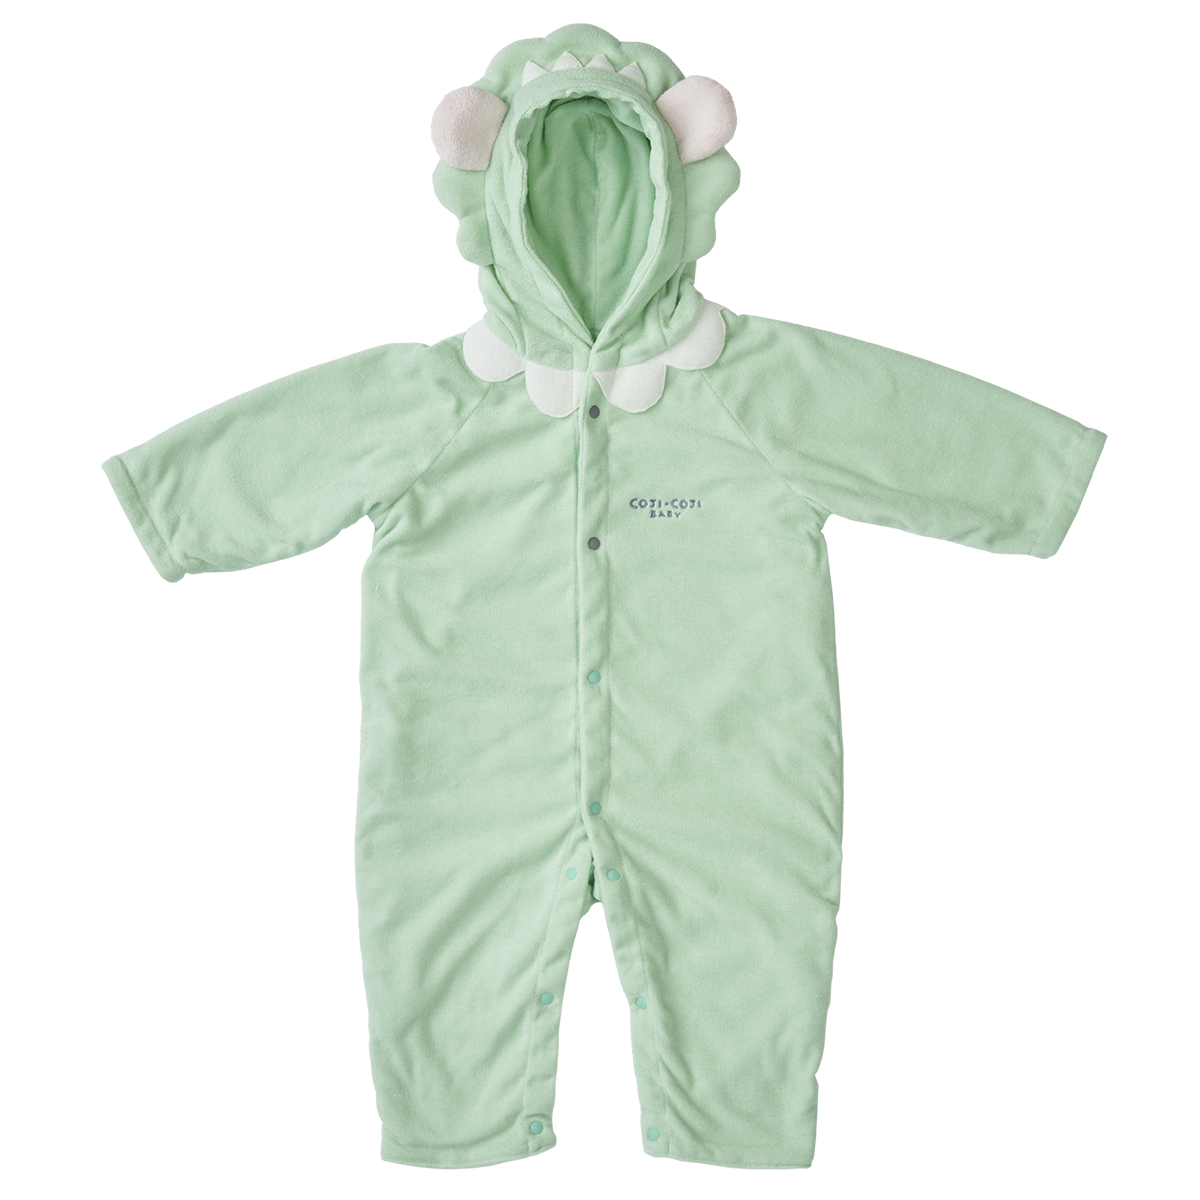 Apparel & Accessories > Clothing > Baby & Toddler Clothing > Baby One-Pieces